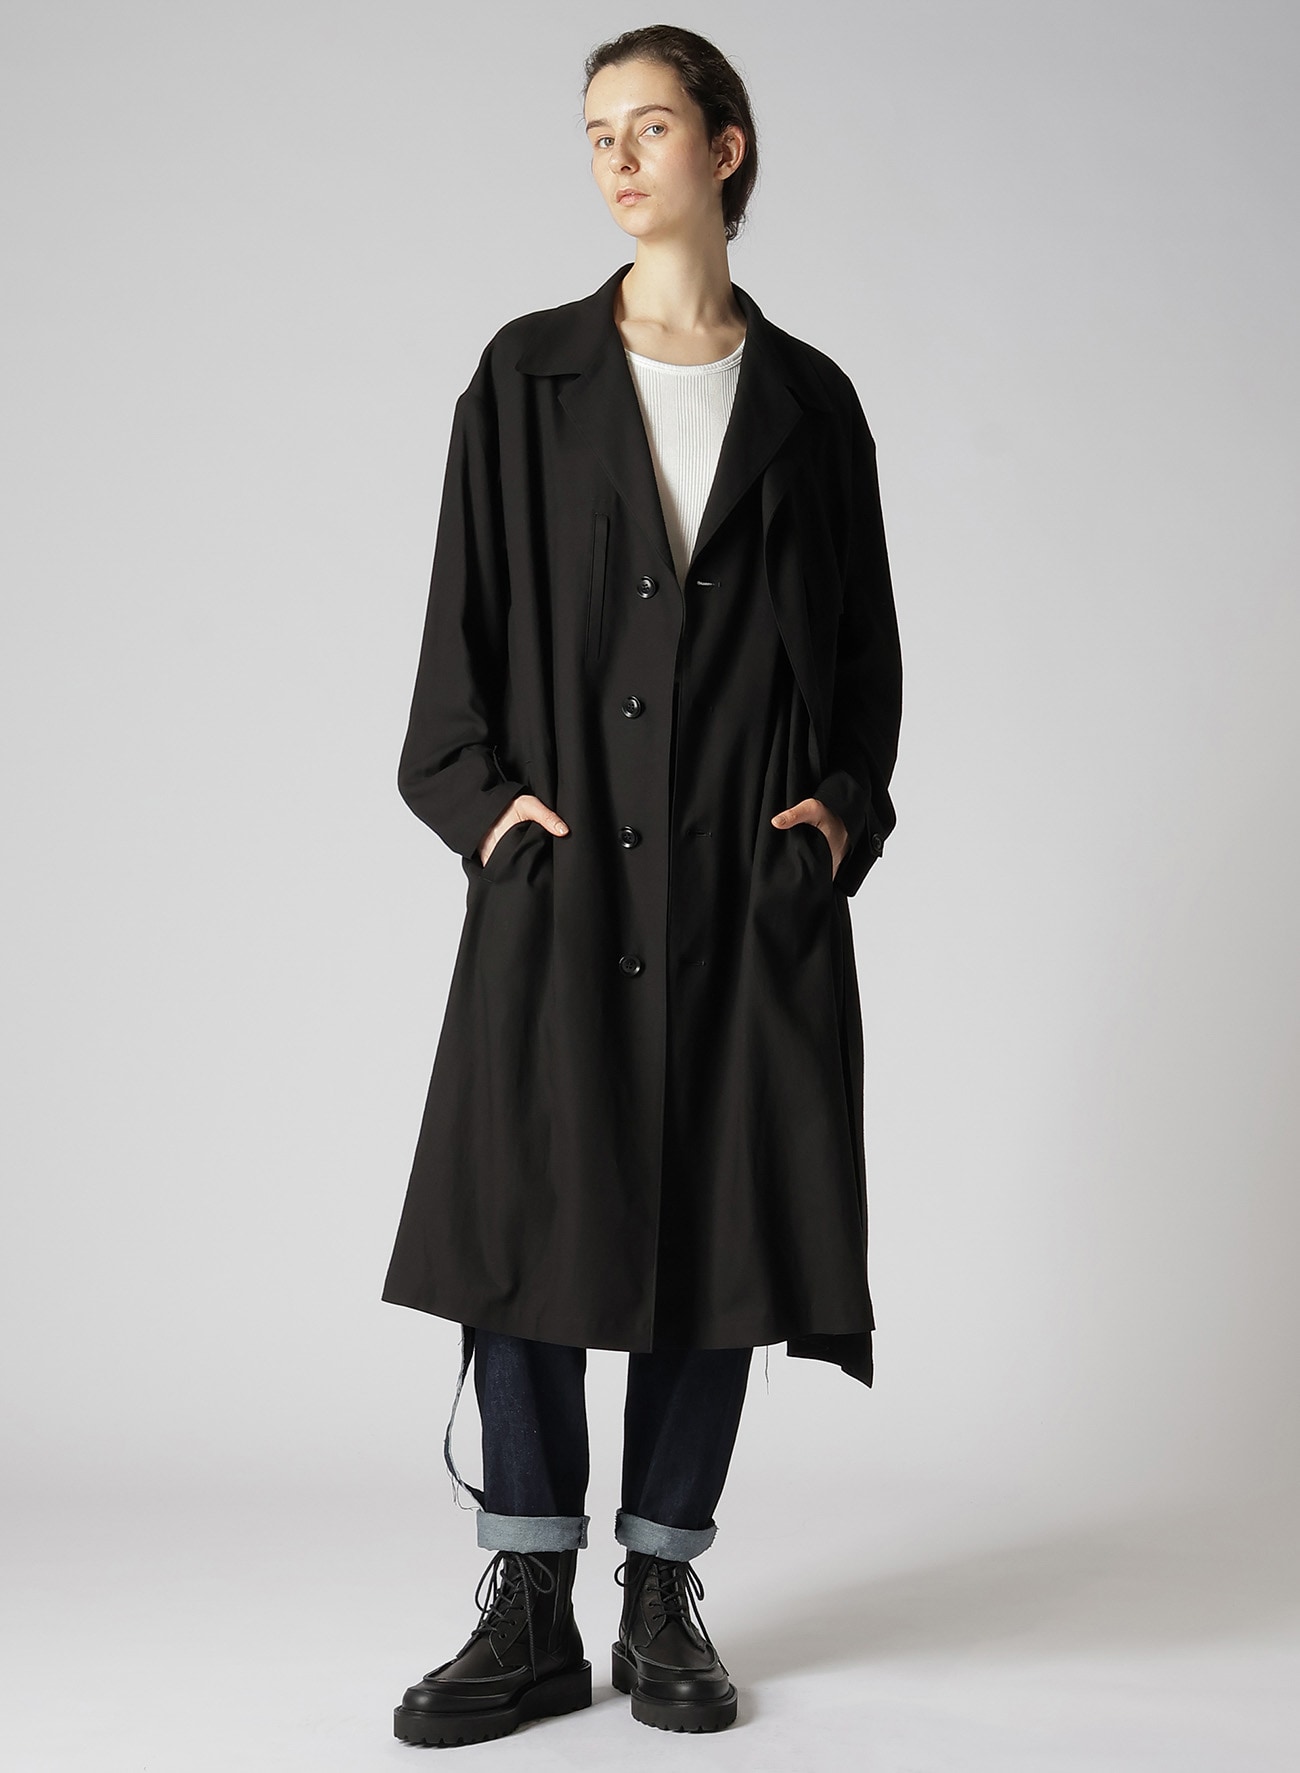 RAYON LINEN LEFT FRONT DOUBLE LAYERED COAT(XS Black): Y's｜THE 